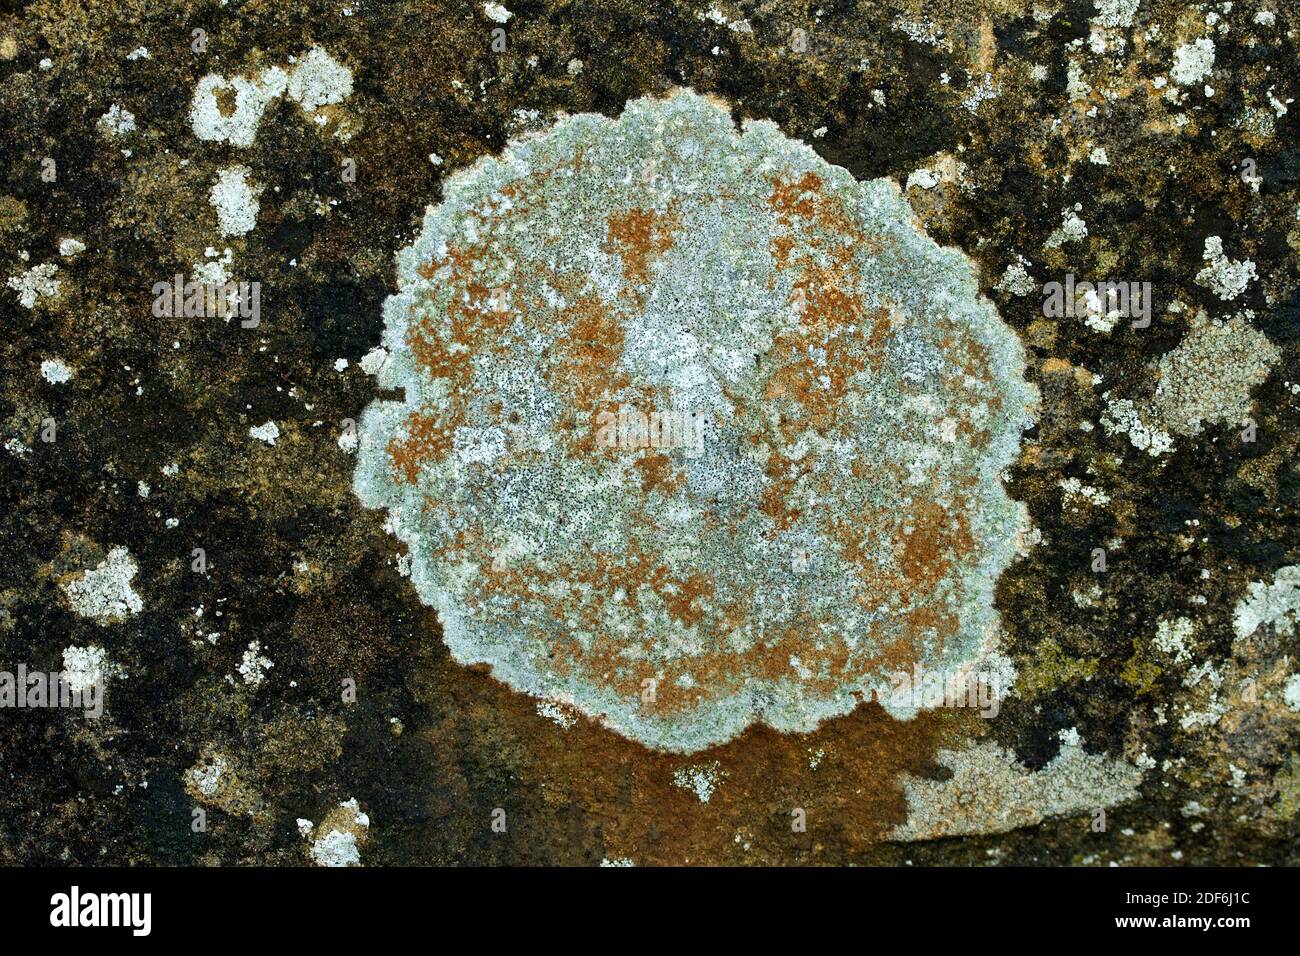 This species of Caloplaca lichen is the only one of the family to have orange ascocarps (spore bodies) with the encrusting grey thallus (main body). Stock Photo